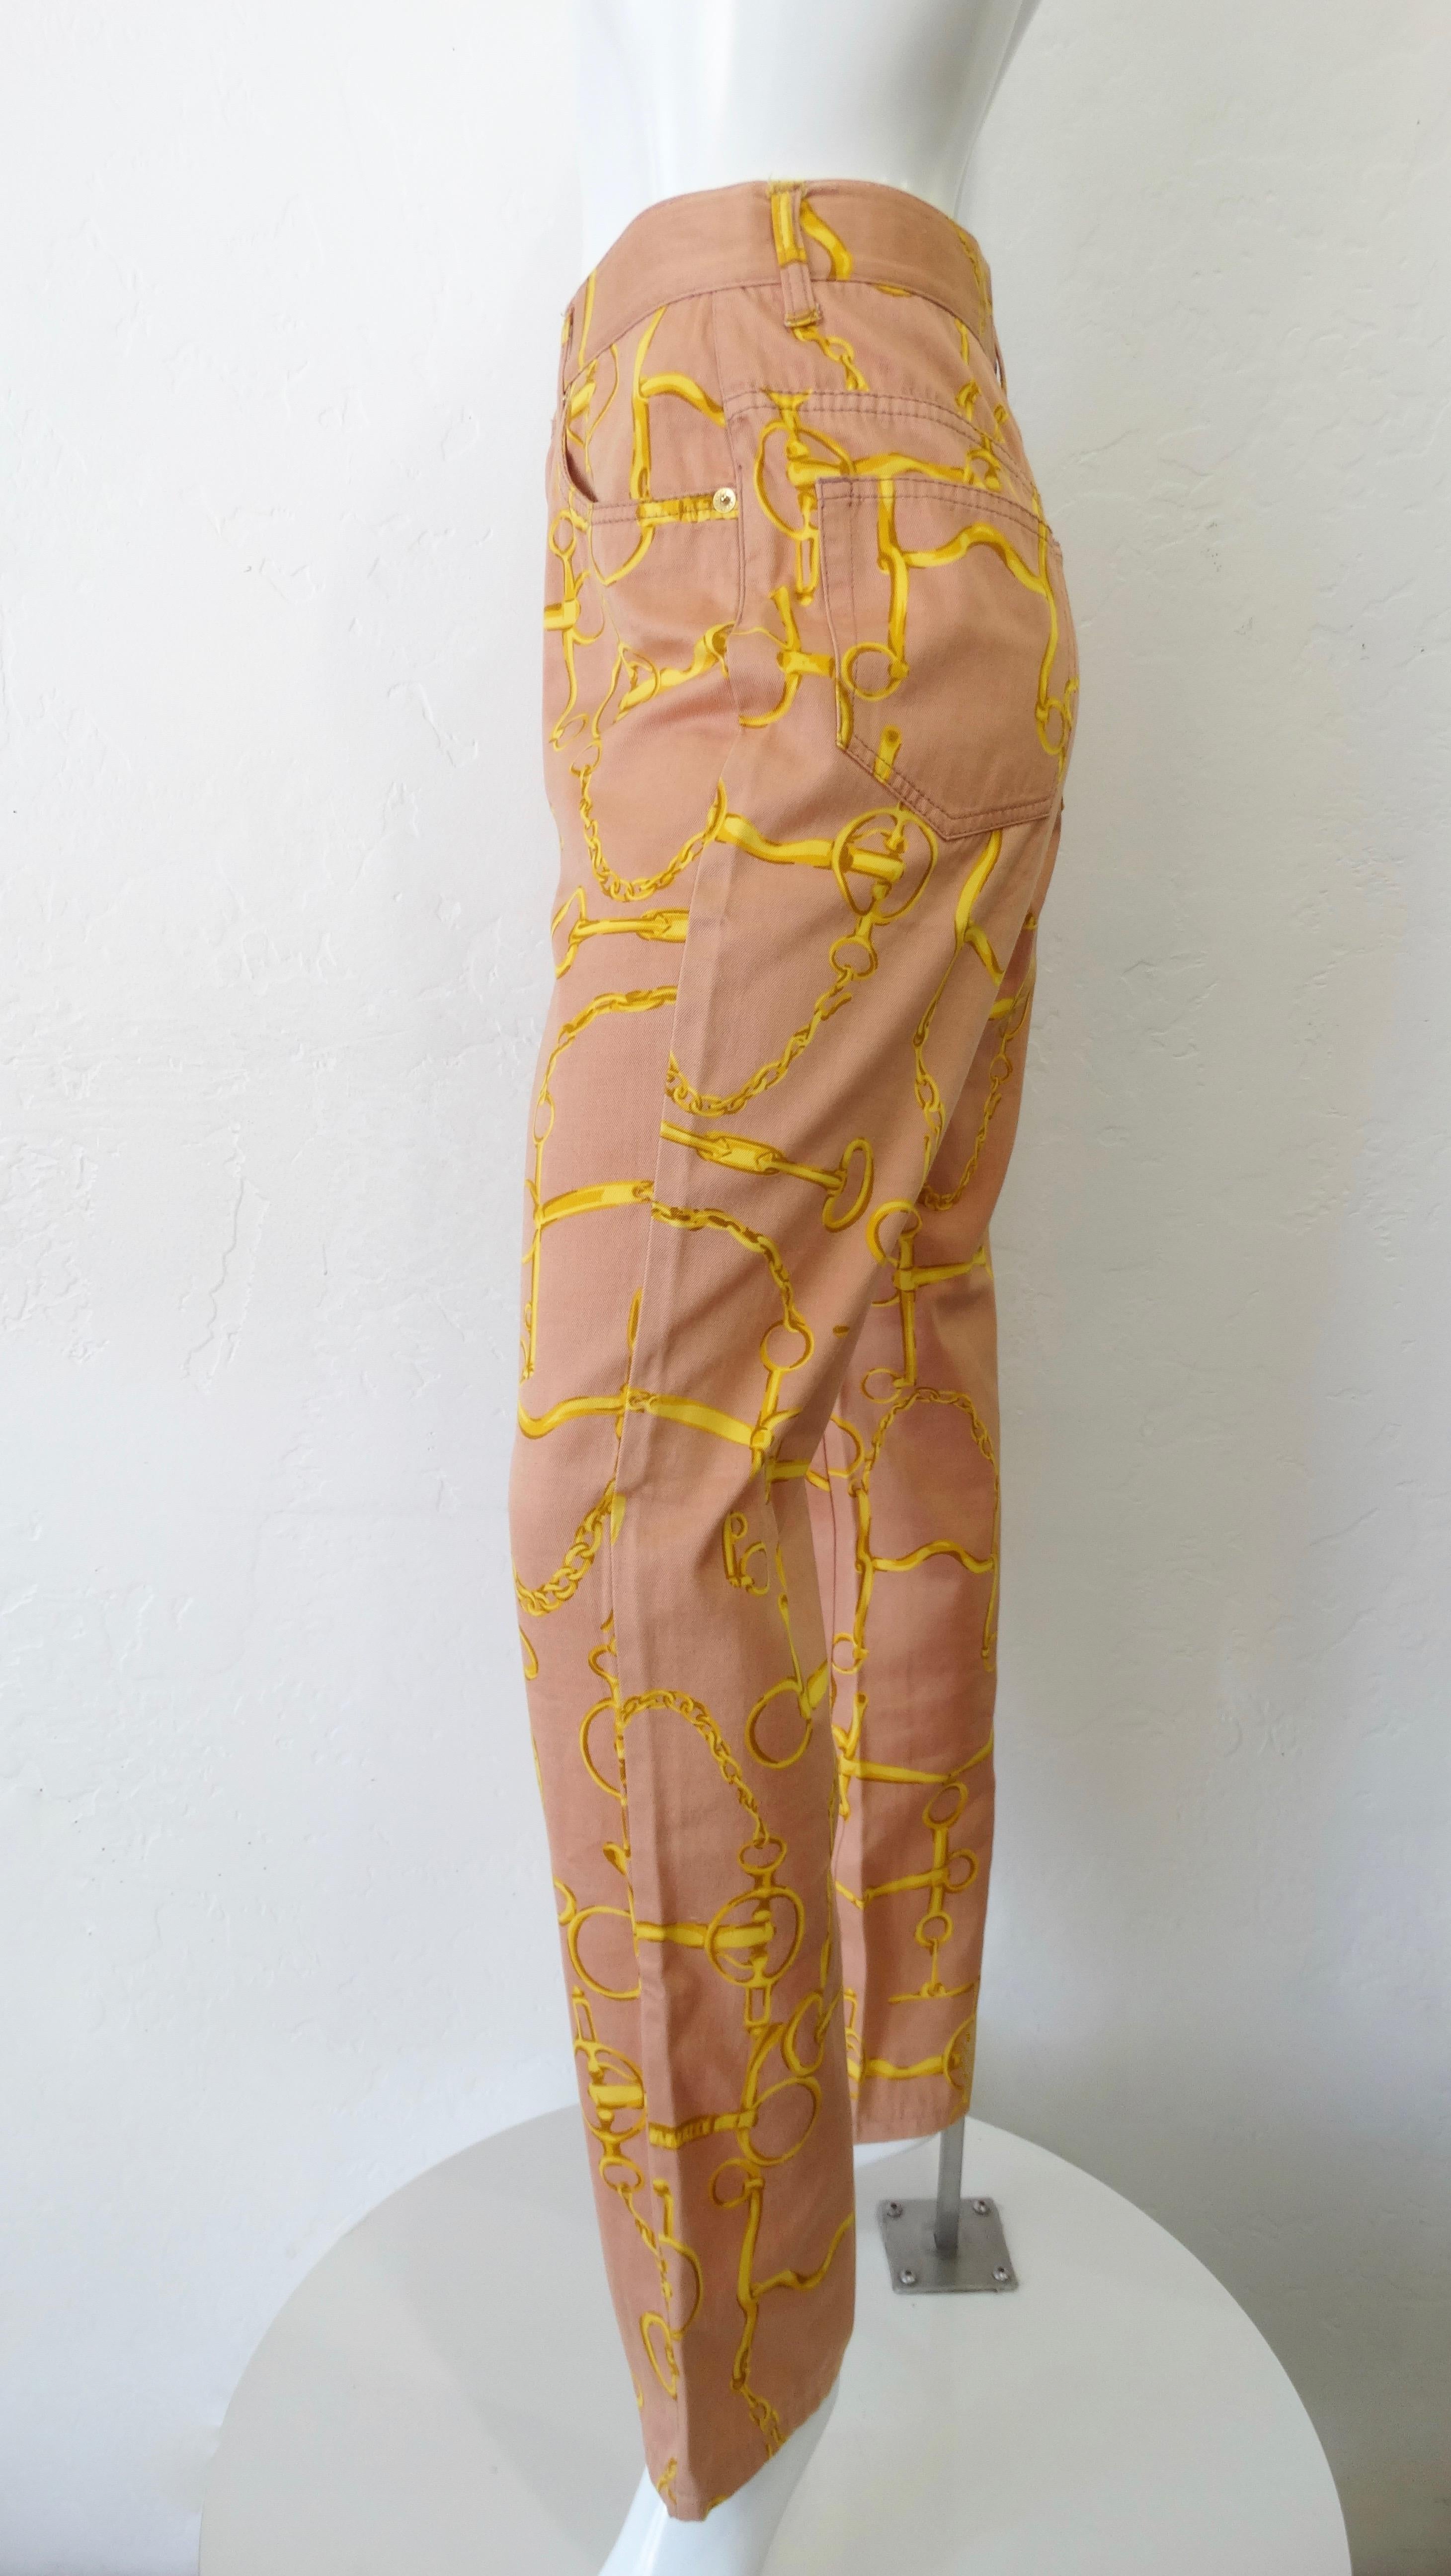 A pair of statement pants are a necessity! Circa 1990s, these Gucci high waisted jeans are a coral color and feature a contrasting gold horse bit pattern. Includes Gucci embossed buttons and leather patch on the back. Pair with a printed shirt or